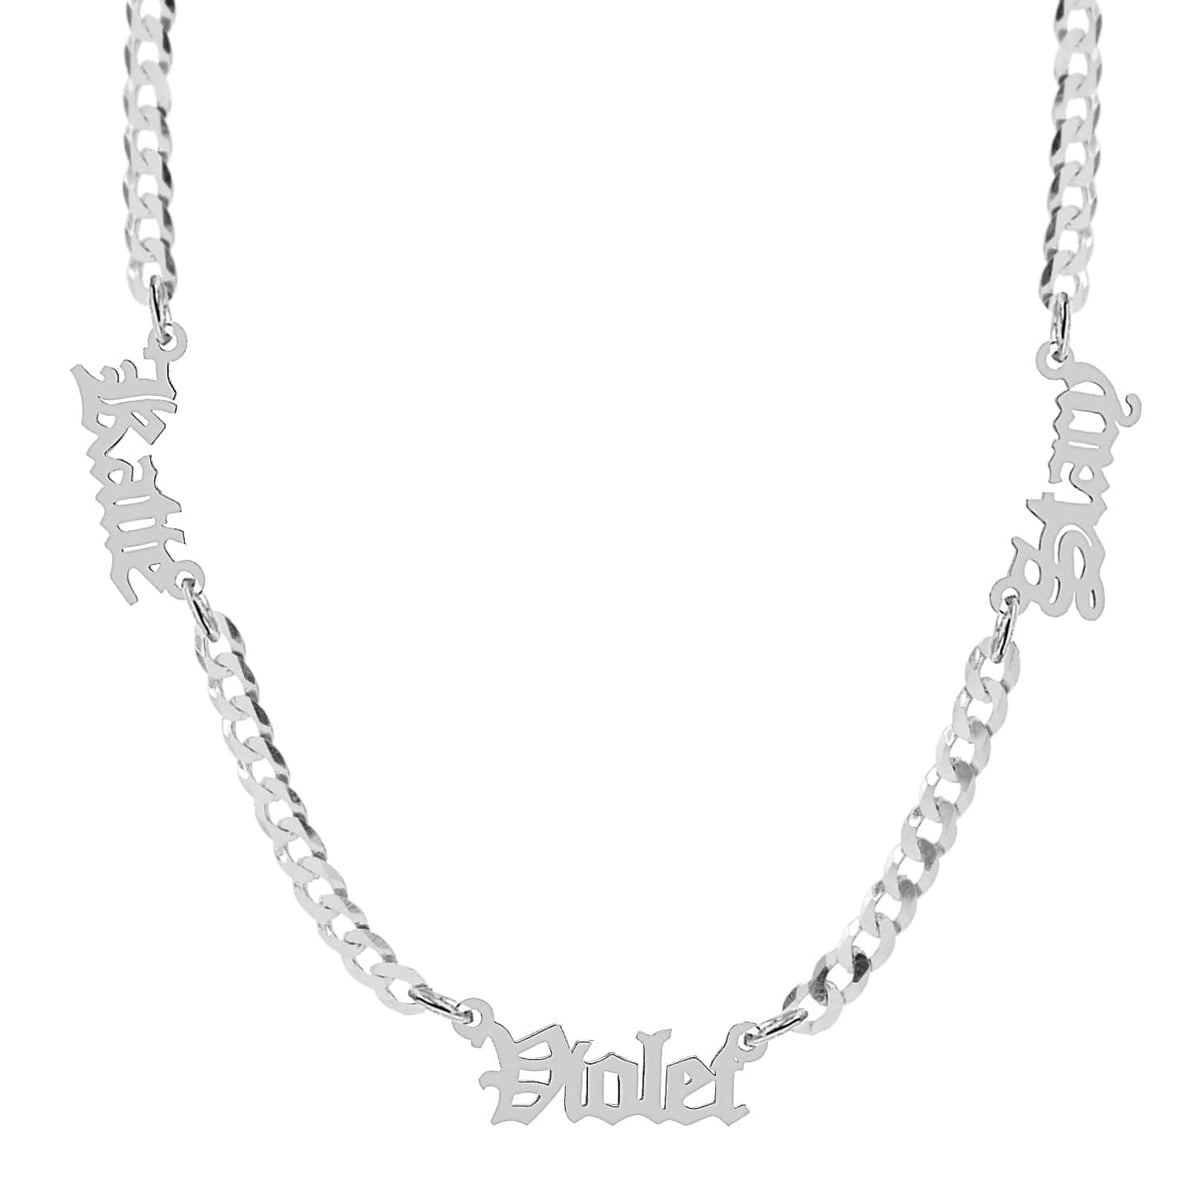 Sterling Silver / Cuban Chain Personalized Nameplate Necklace w/ Three Gothic Names on Cuban Chain